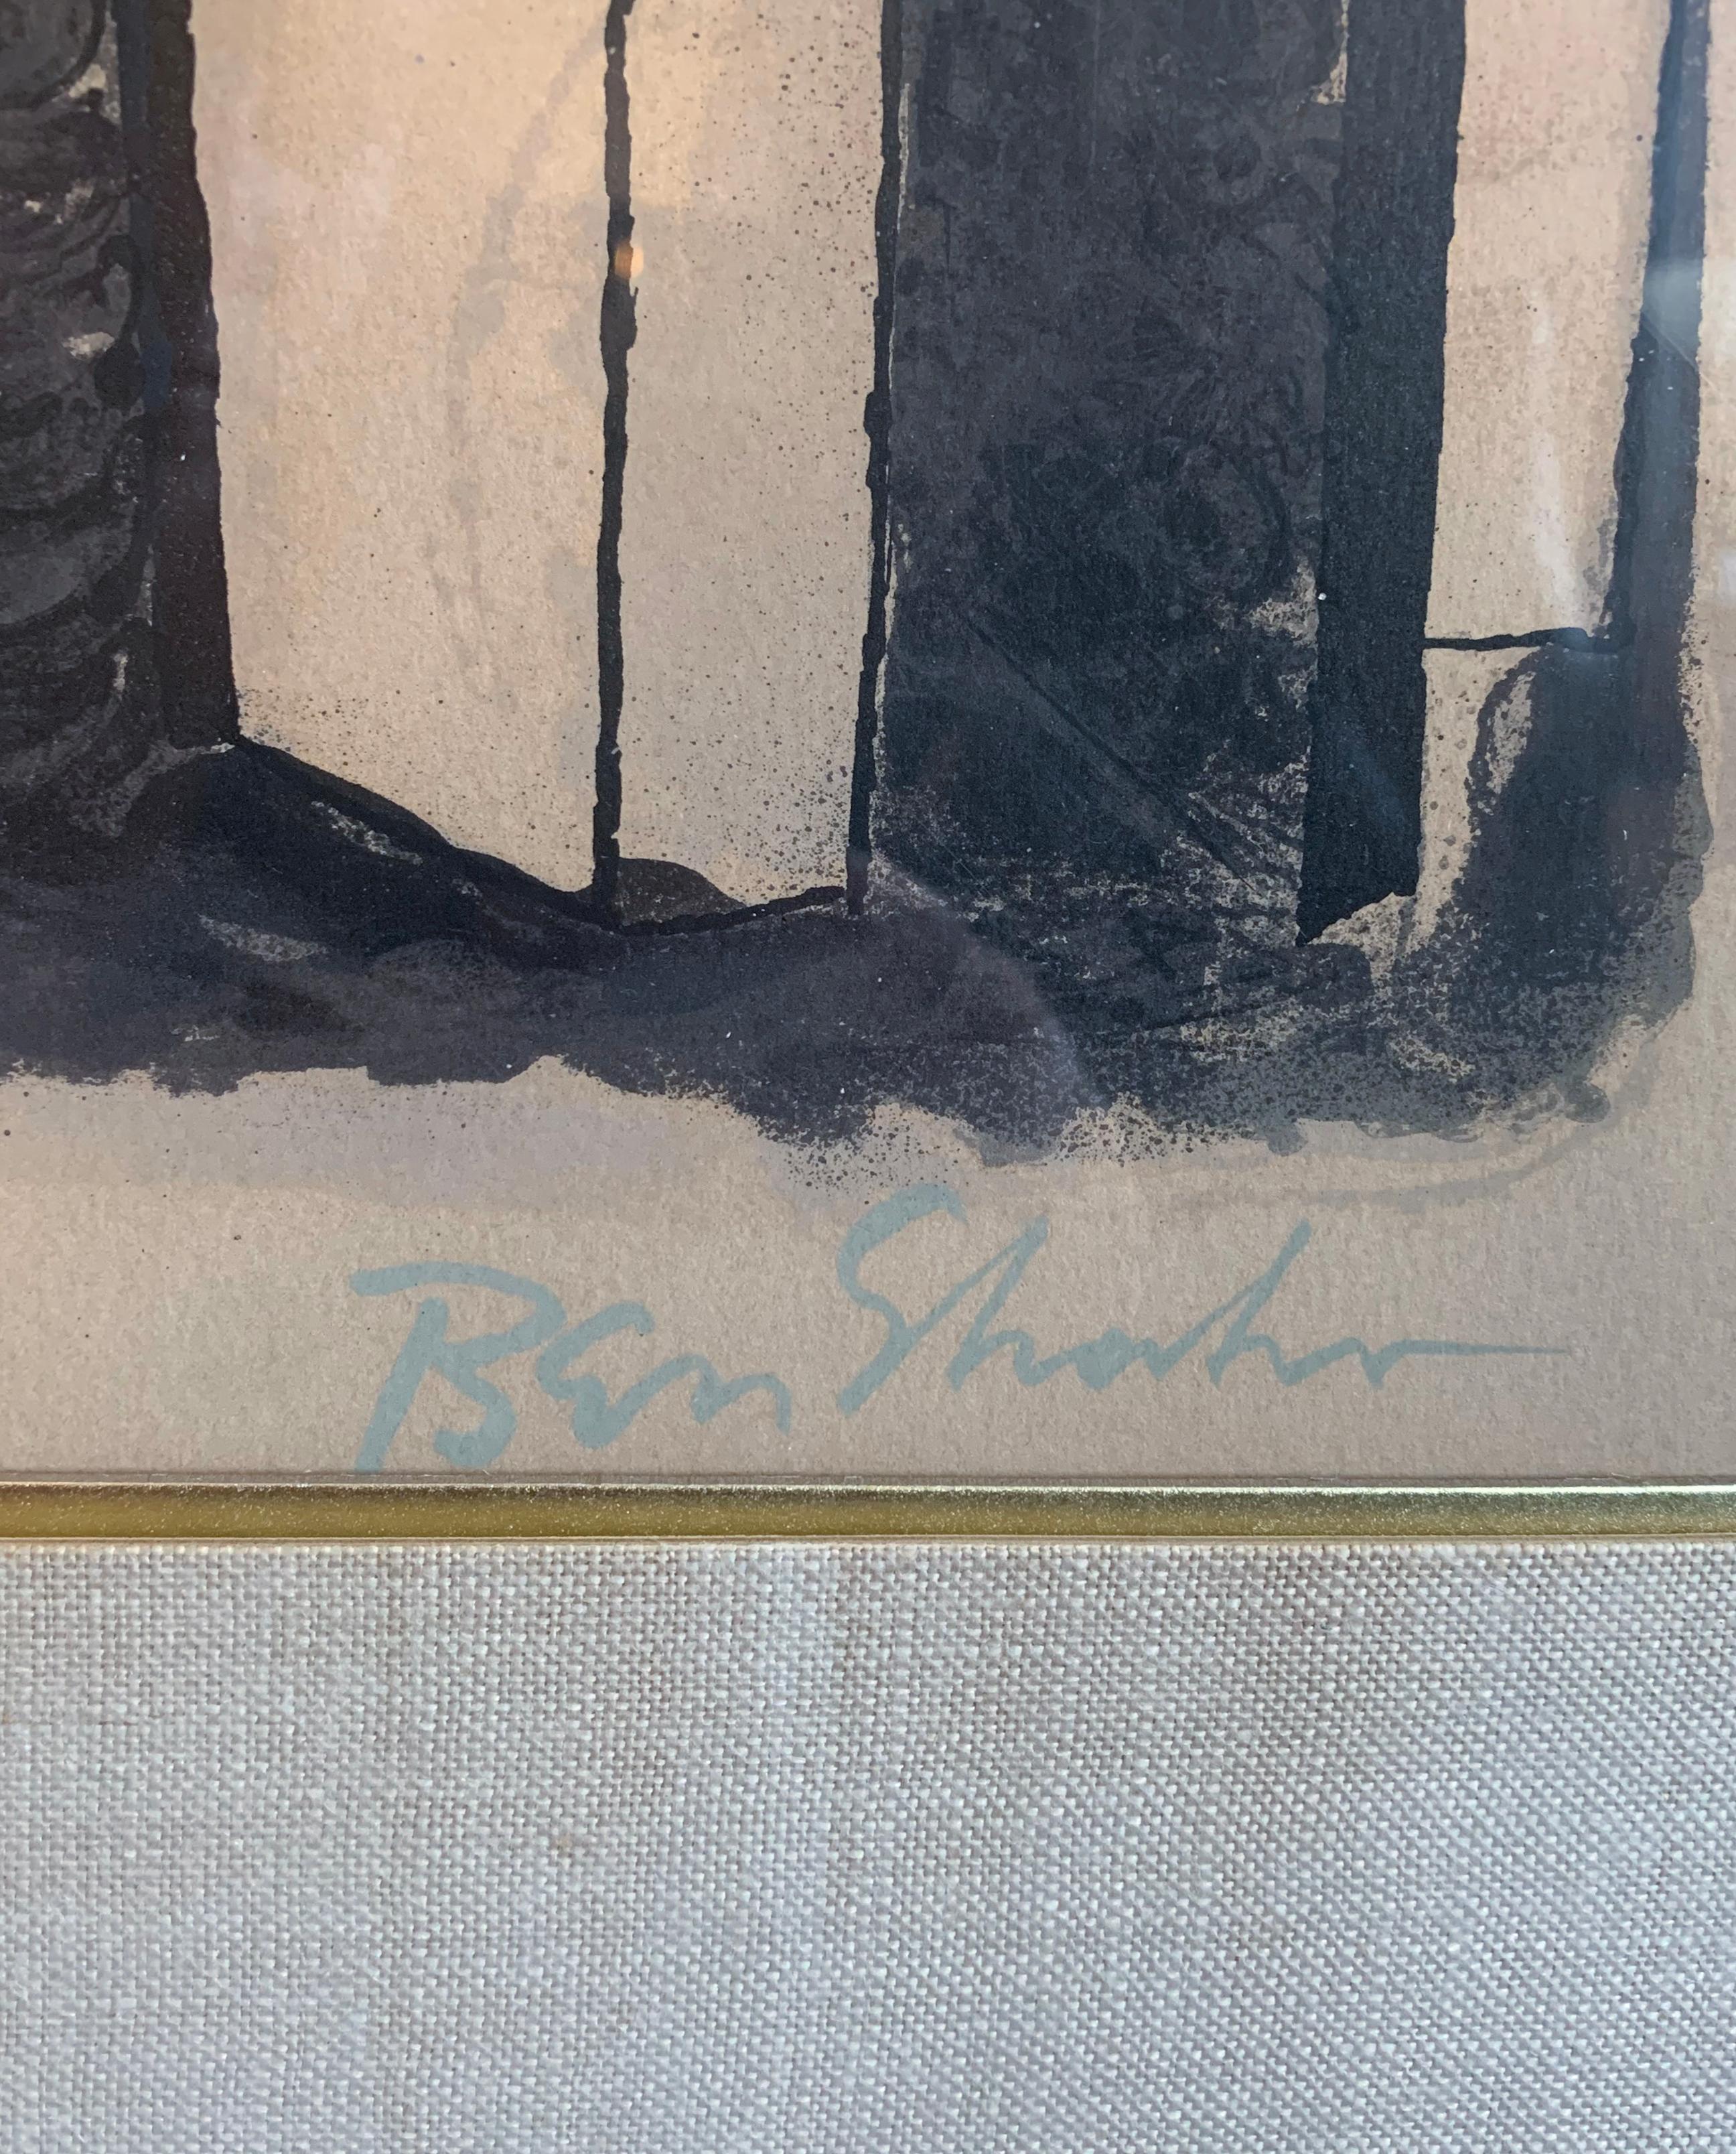 Unknown Ben Shahn, for the Sake of a Single Verse, Signed Original Lithograph